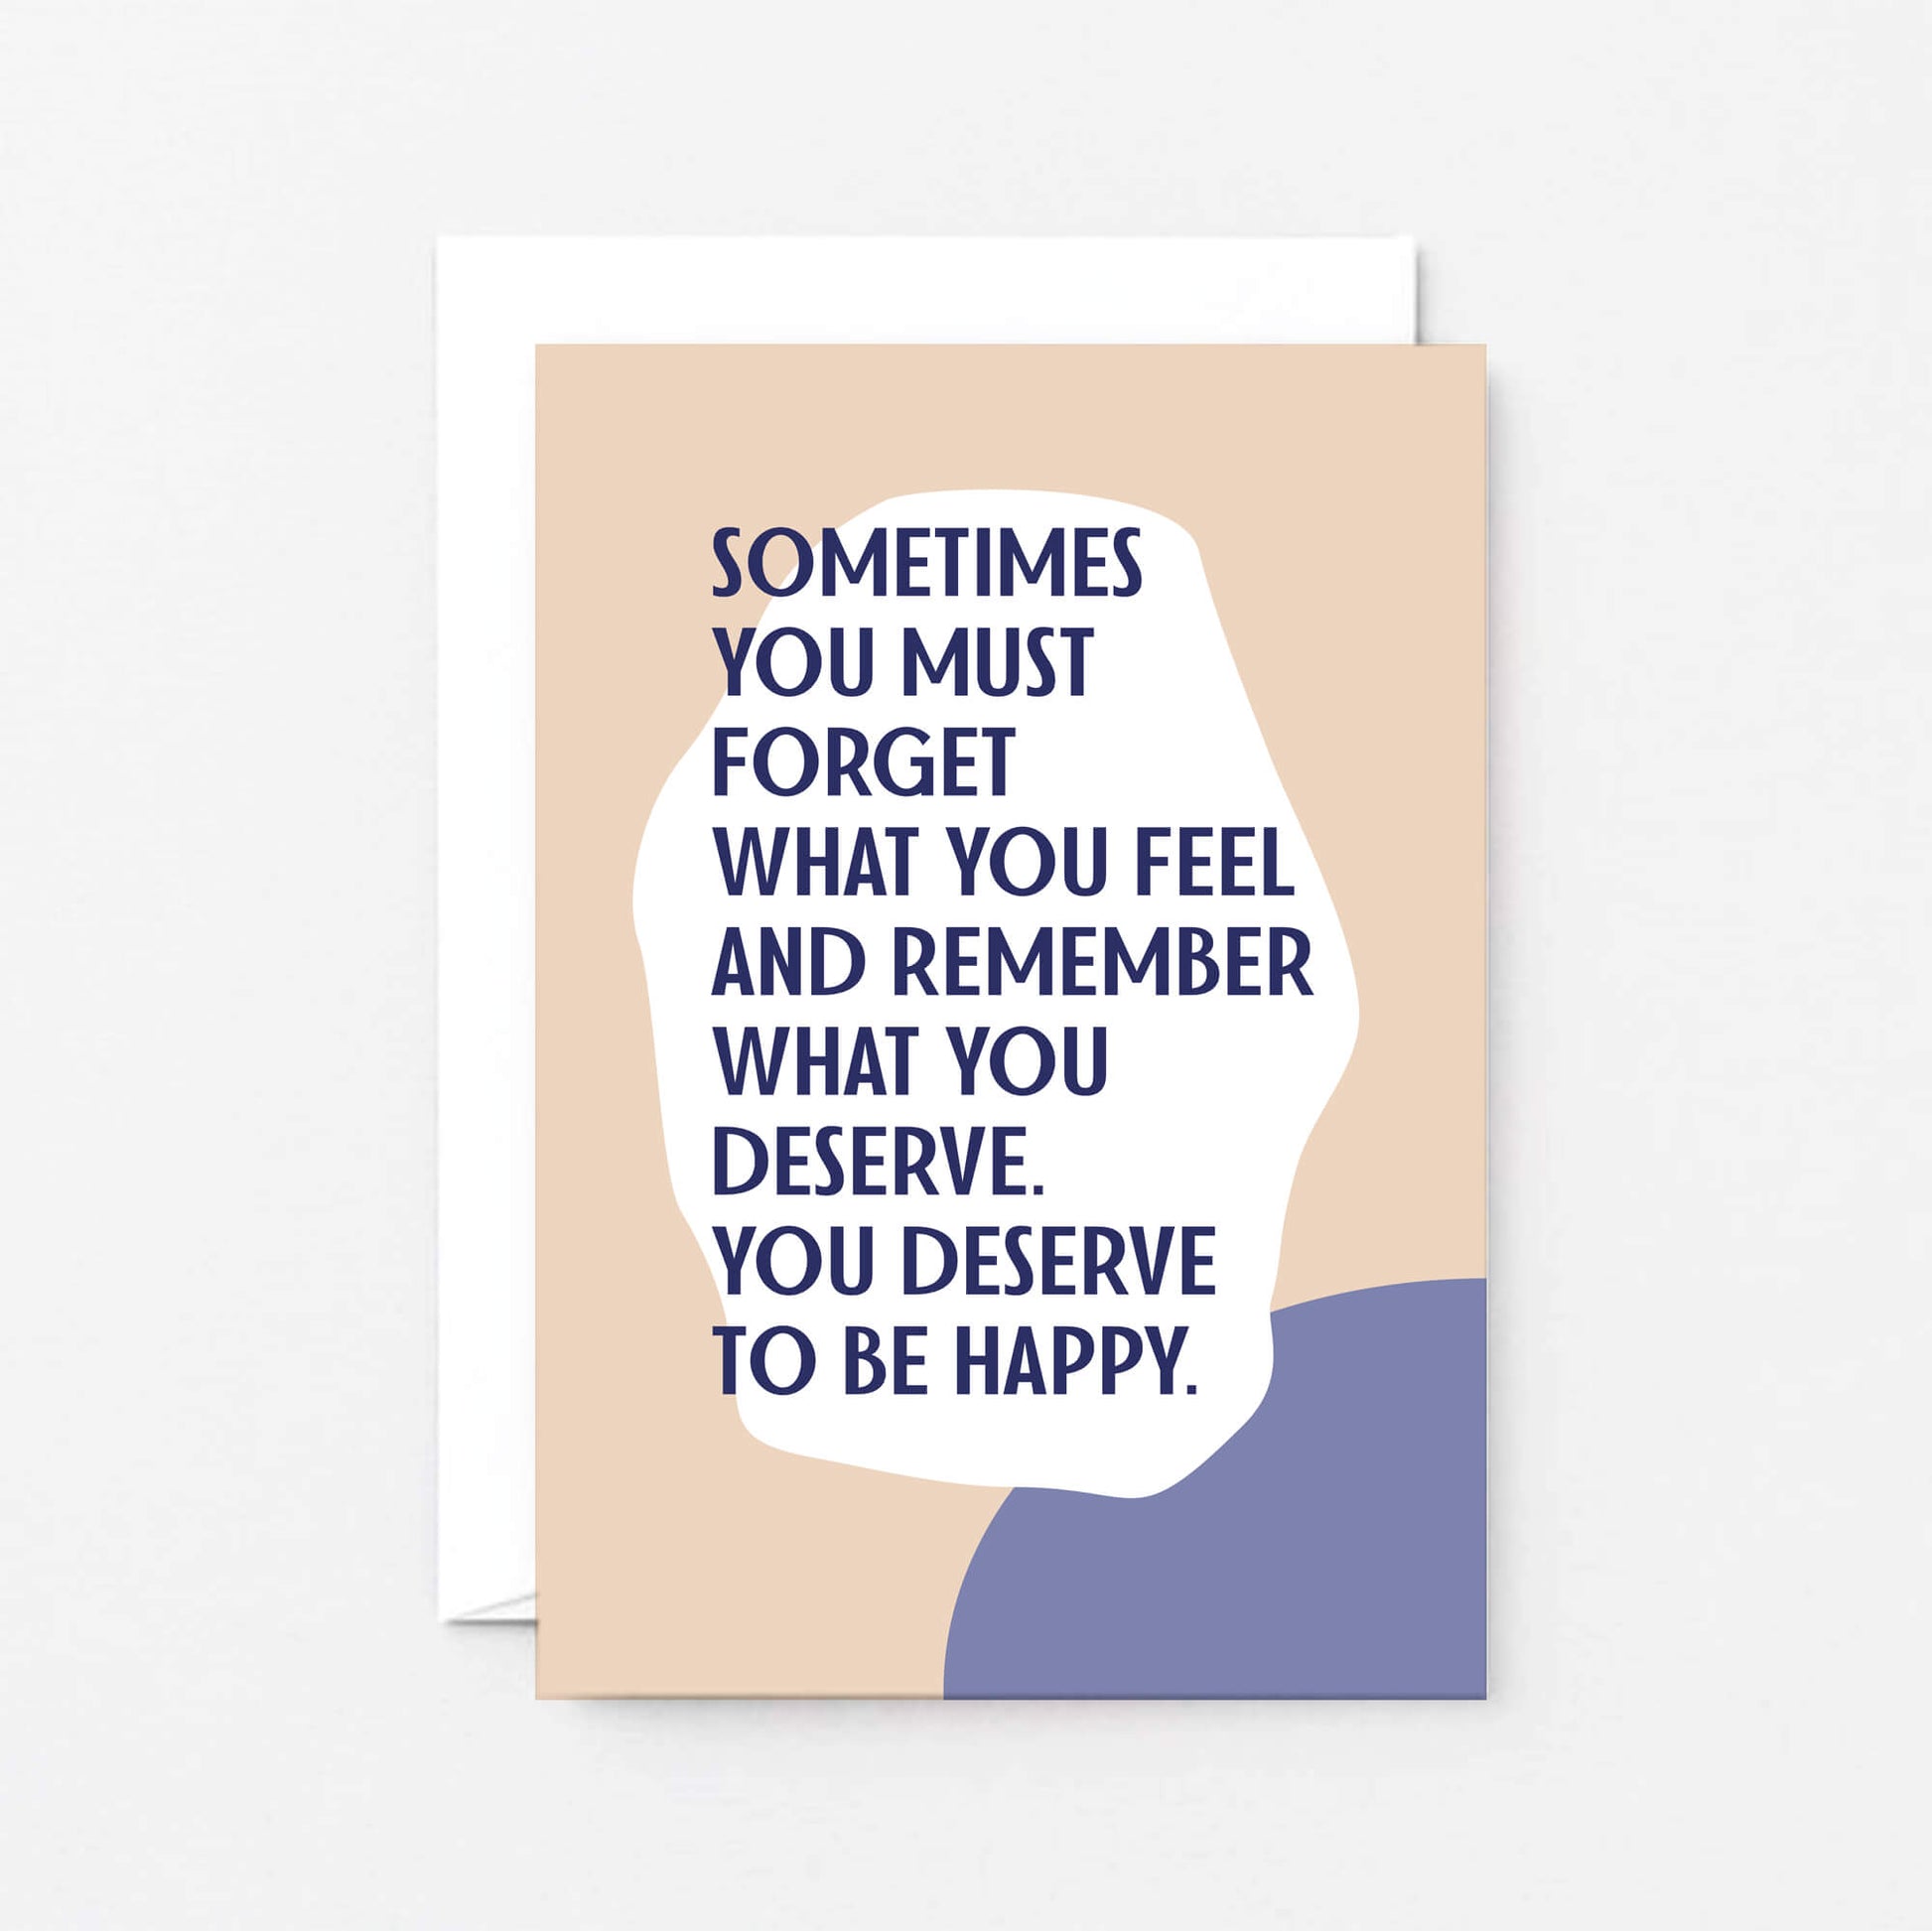 Breakup Card by SixElevenCreations. Reads Sometimes you must forget what you feel and remember what you deserve. You deserve to be happy. Product Code SE1110A6